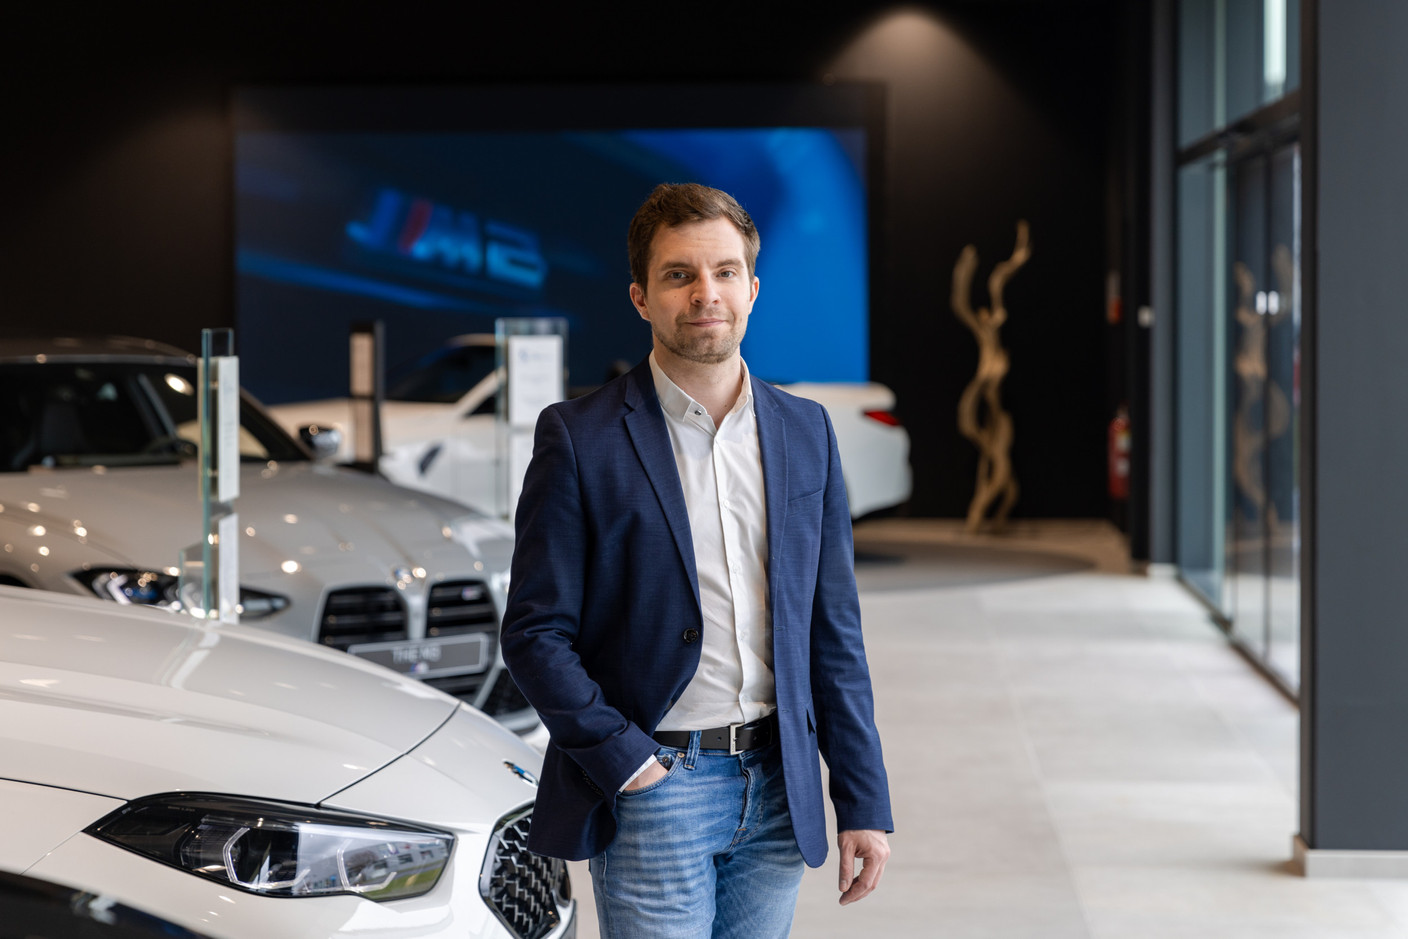 Bilia-Emond Luxembourg has 55% of the BMW market share in the grand duchy, 100% for Mini (for the latter, it’s an exclusive dealer), per Olivier François (pictured)--the dealership sells around 2,000 BMWs and 700 Minis a year. Photo: Romain Gamba